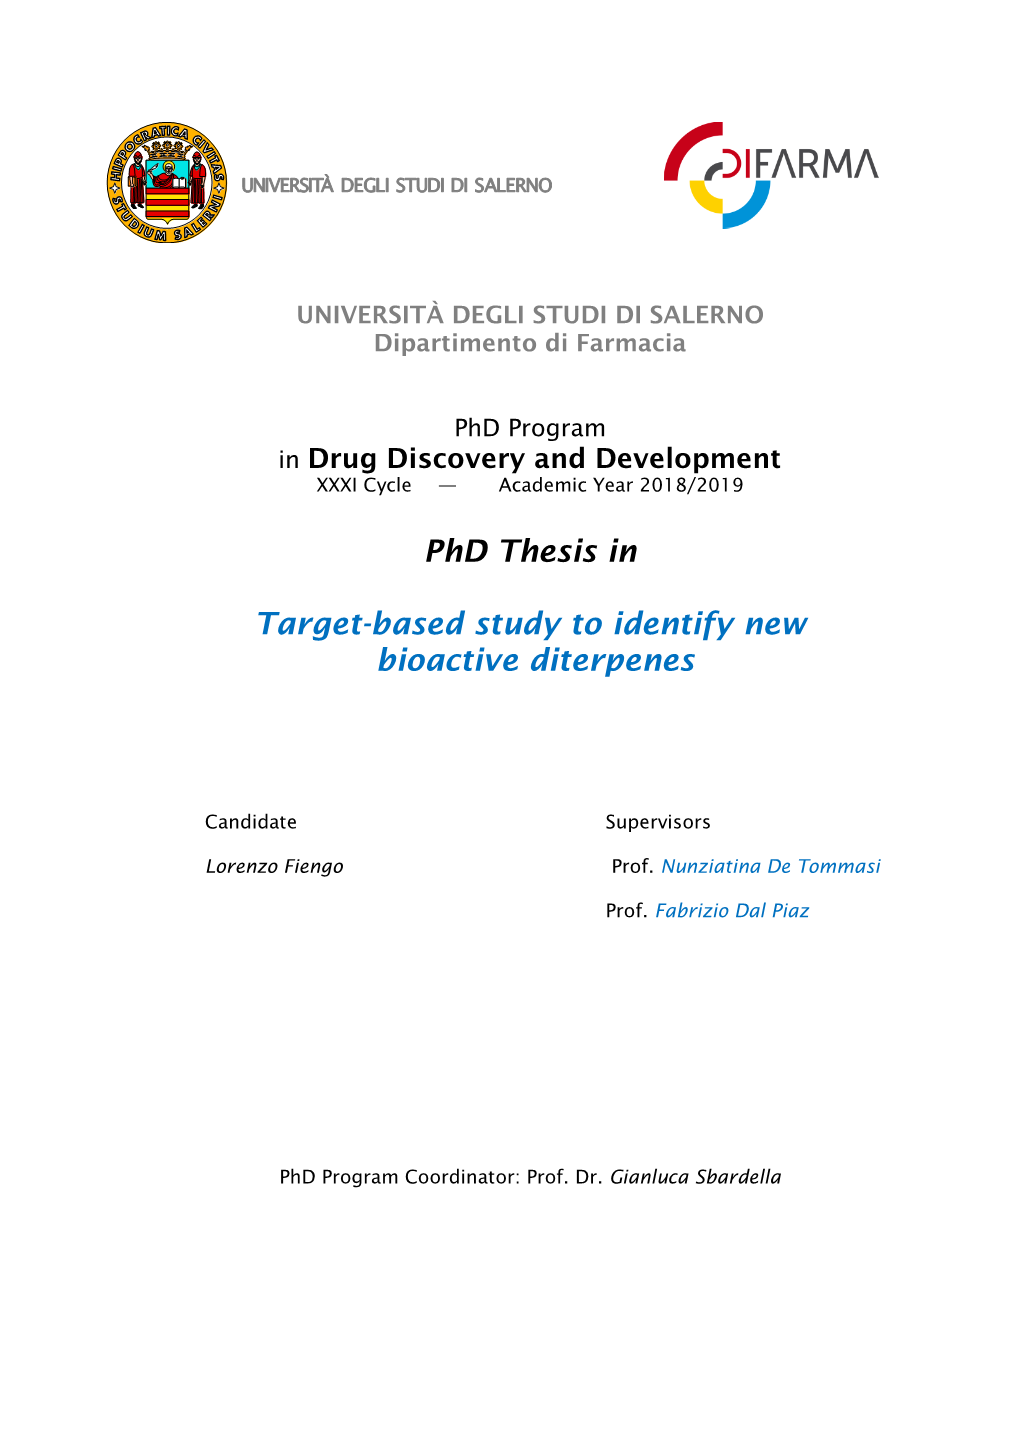 Phd Thesis in Target-Based Study to Identify New Bioactive Diterpenes